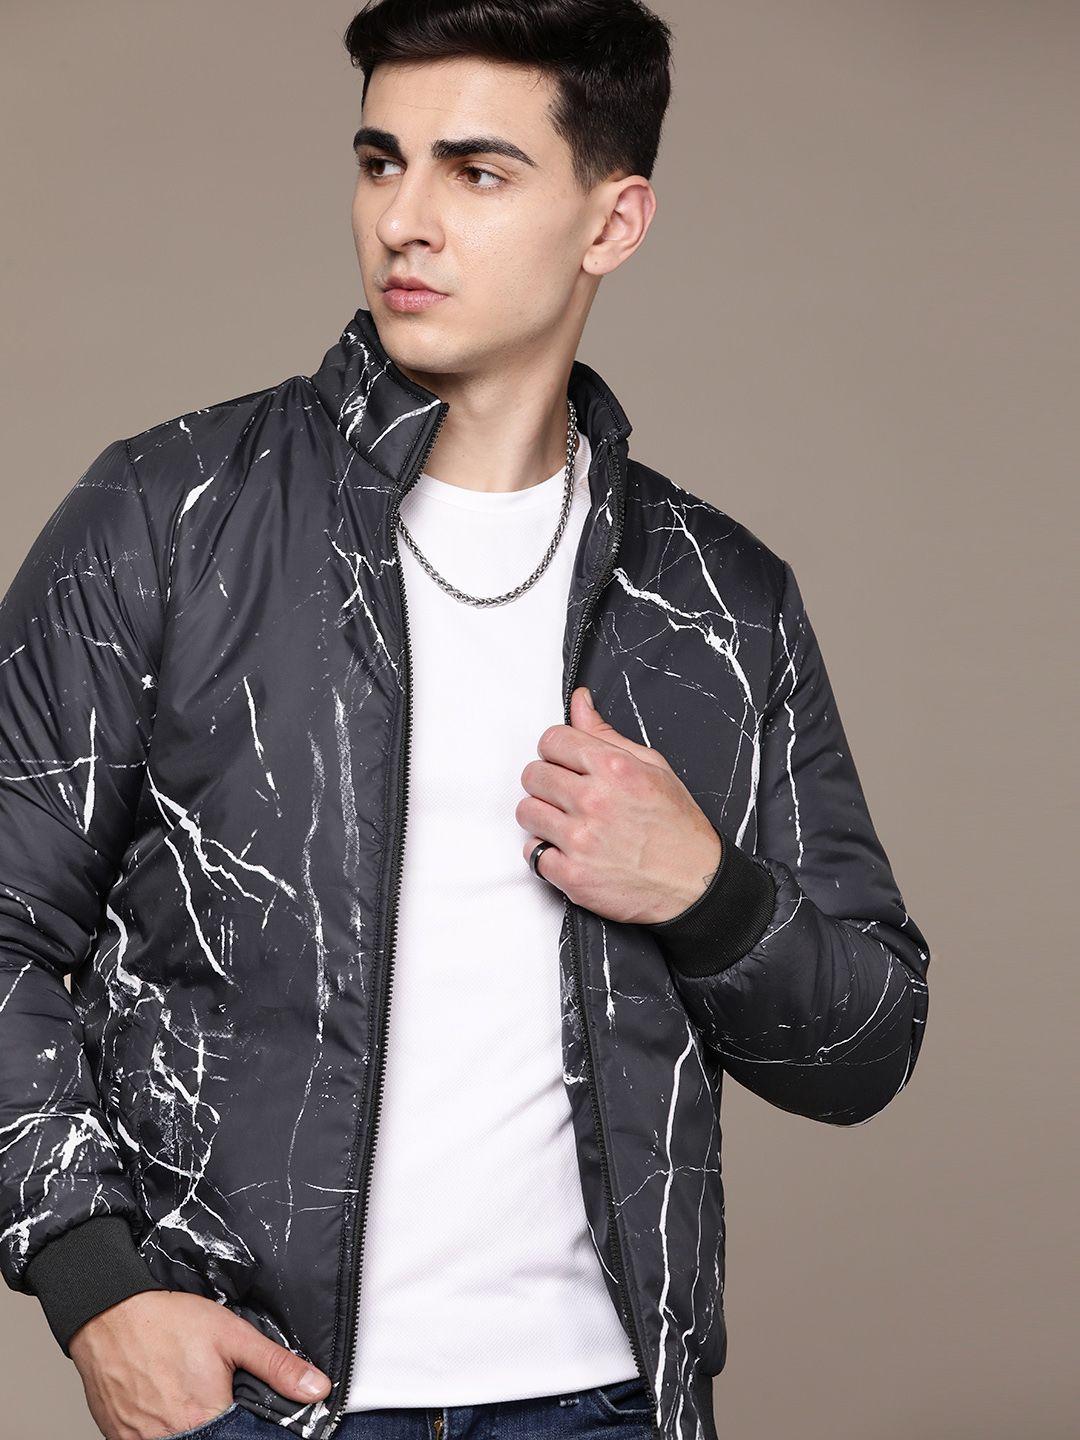 the roadster lifestyle co. monochrome printed bomber jacket